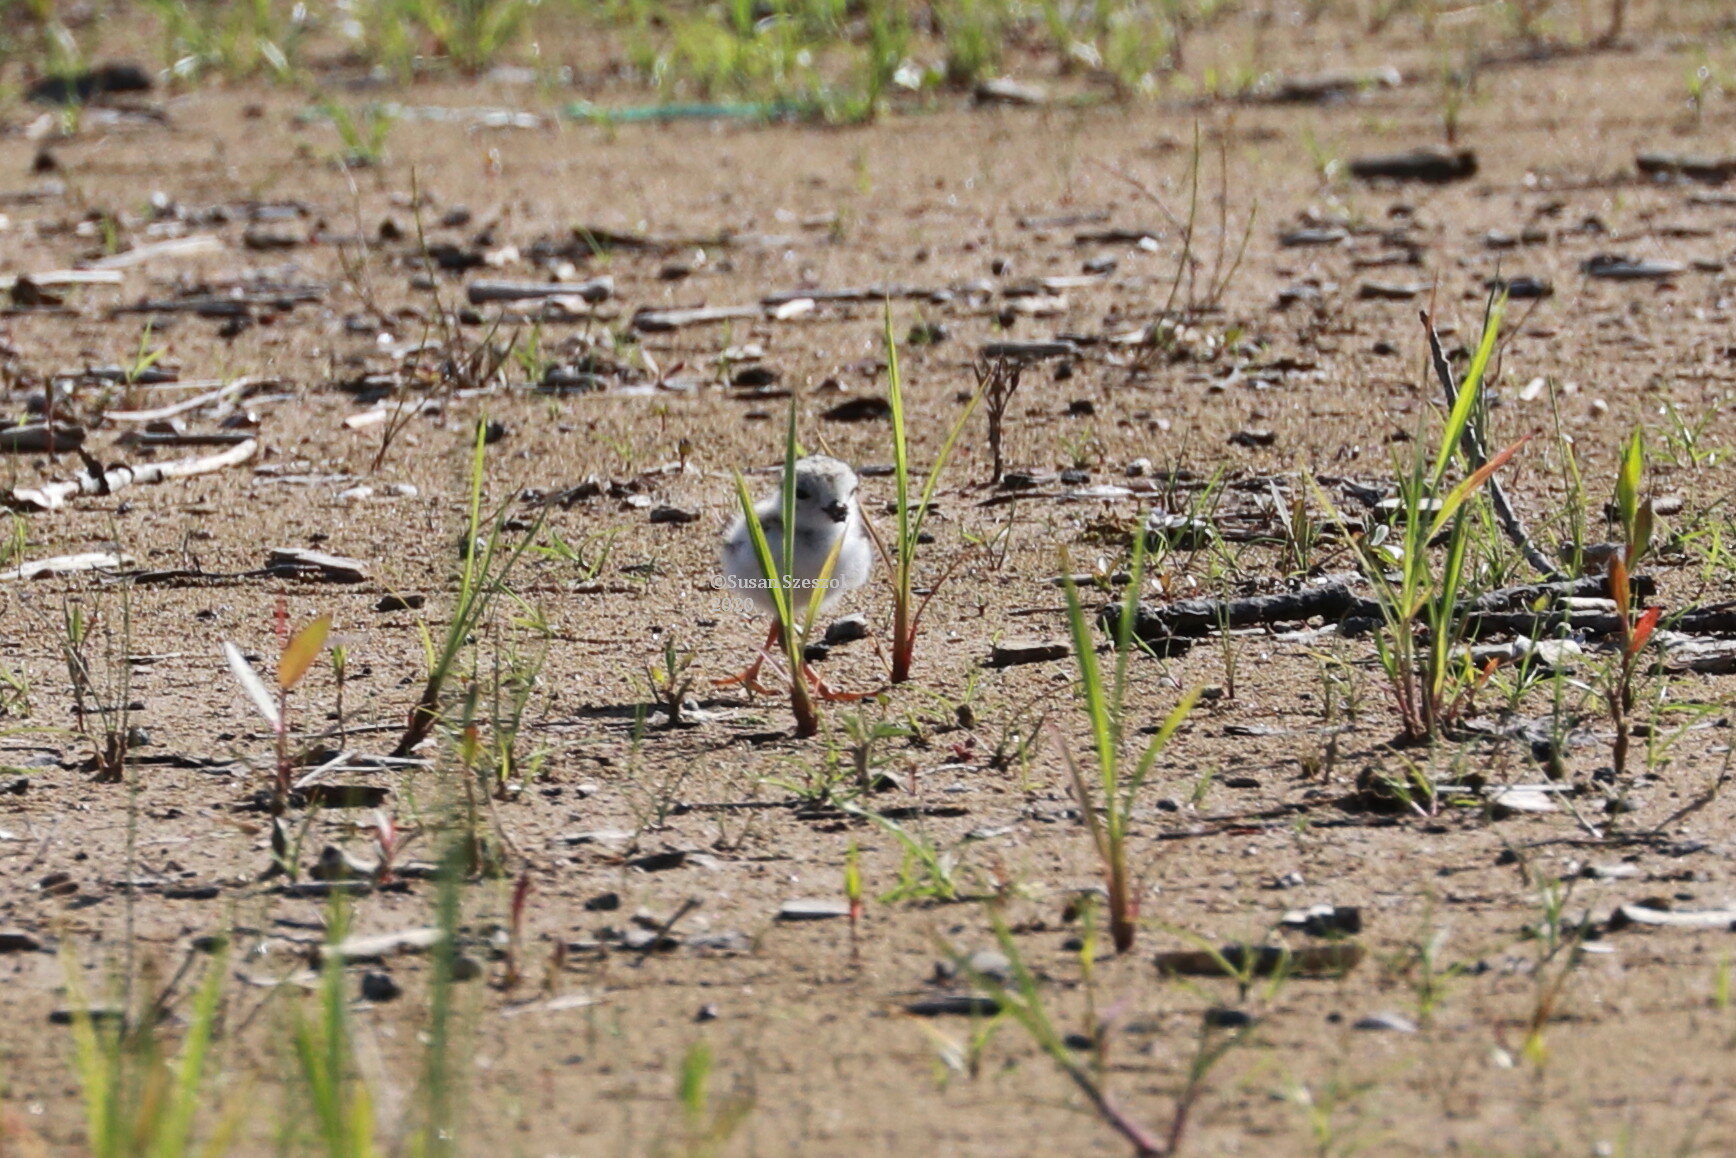 Plover chick at one week